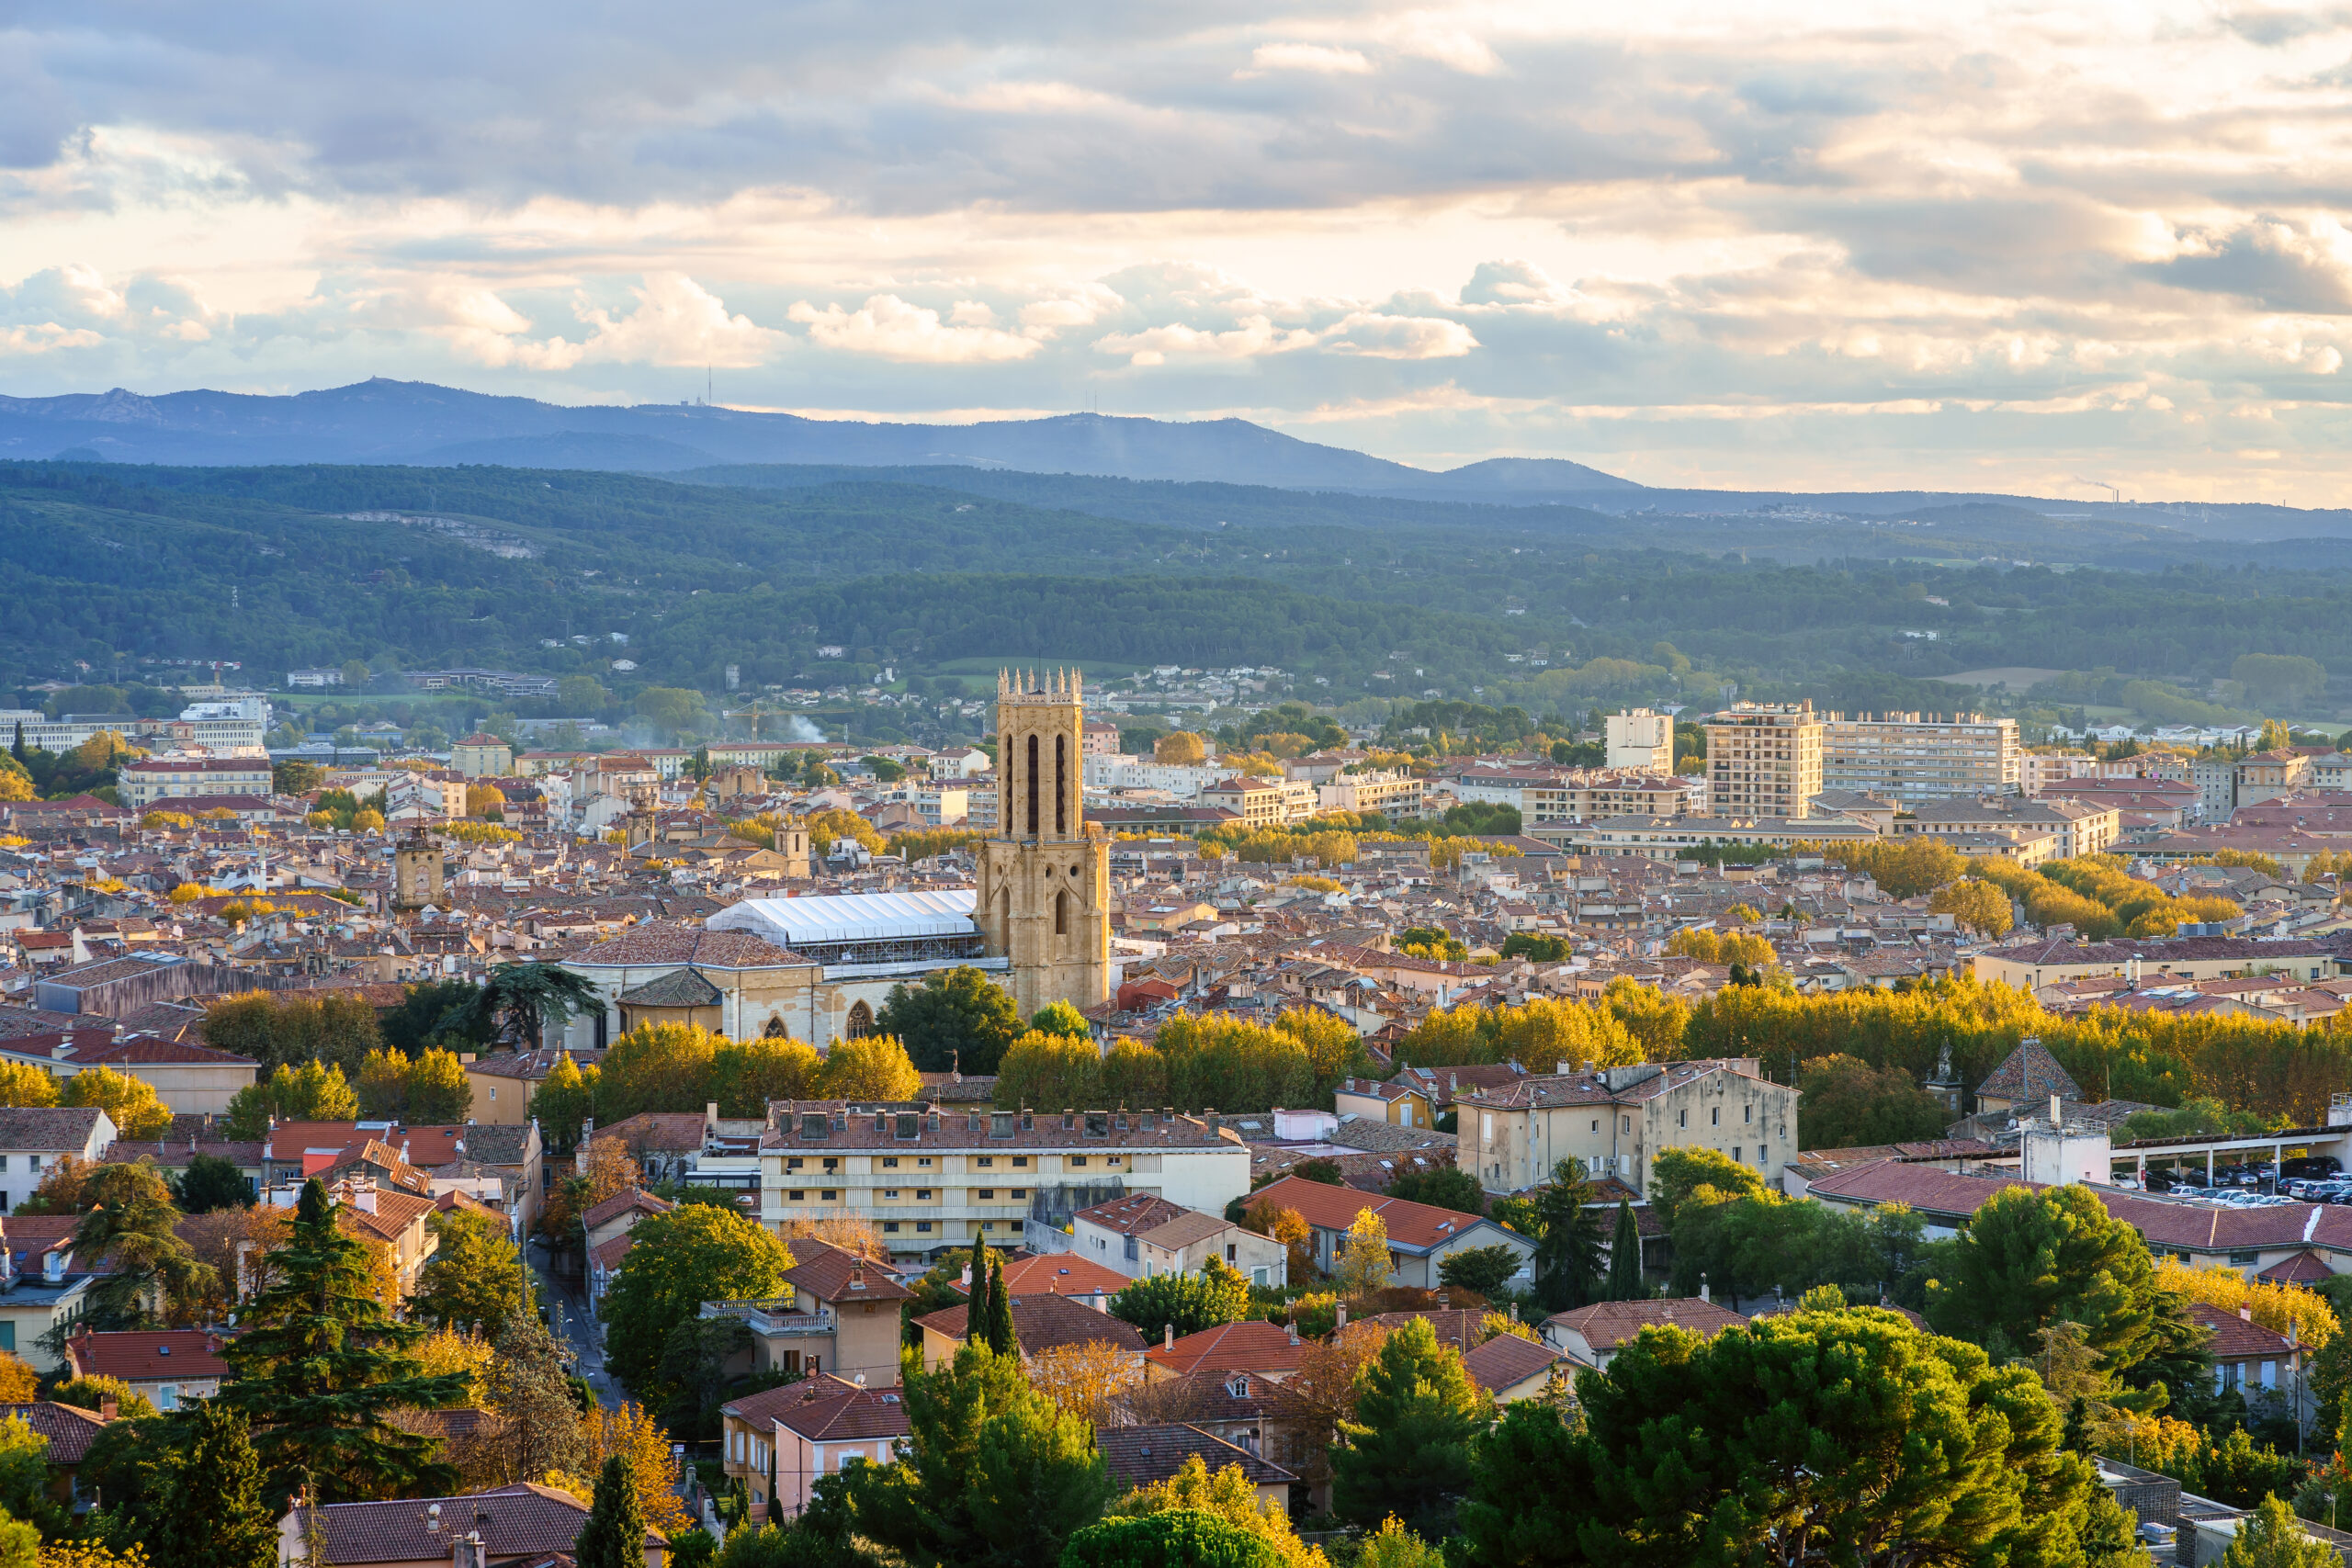 Panoramic,View,Of,Aix-en-provence,In,Autumn.,Sunset.,France,,Provence.